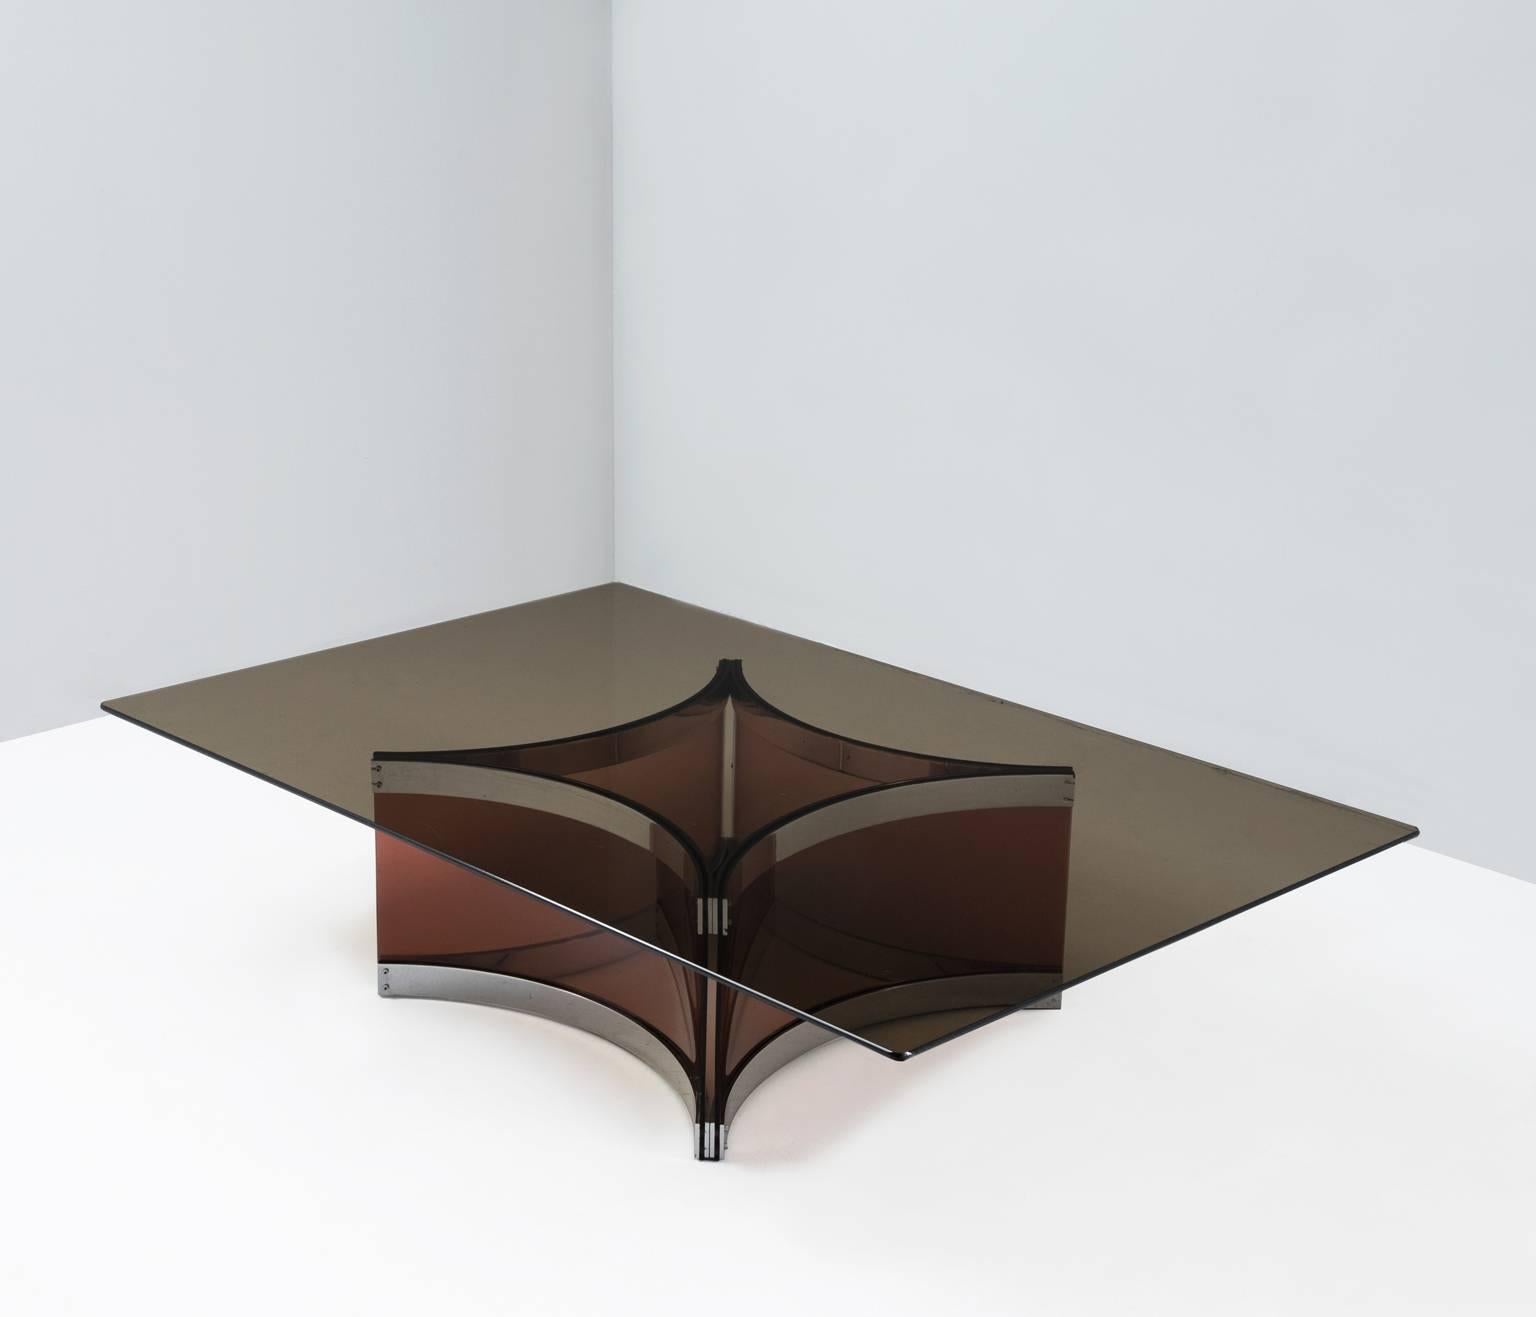 Rectangular glass coffee table in two tones, Italy, 1970s.
Designed by Alessandro Albrizzi.

This well sized coffee table has a very unusual base. The top and base were made in two tones of smoked glass. 

The curved glass segments of the base